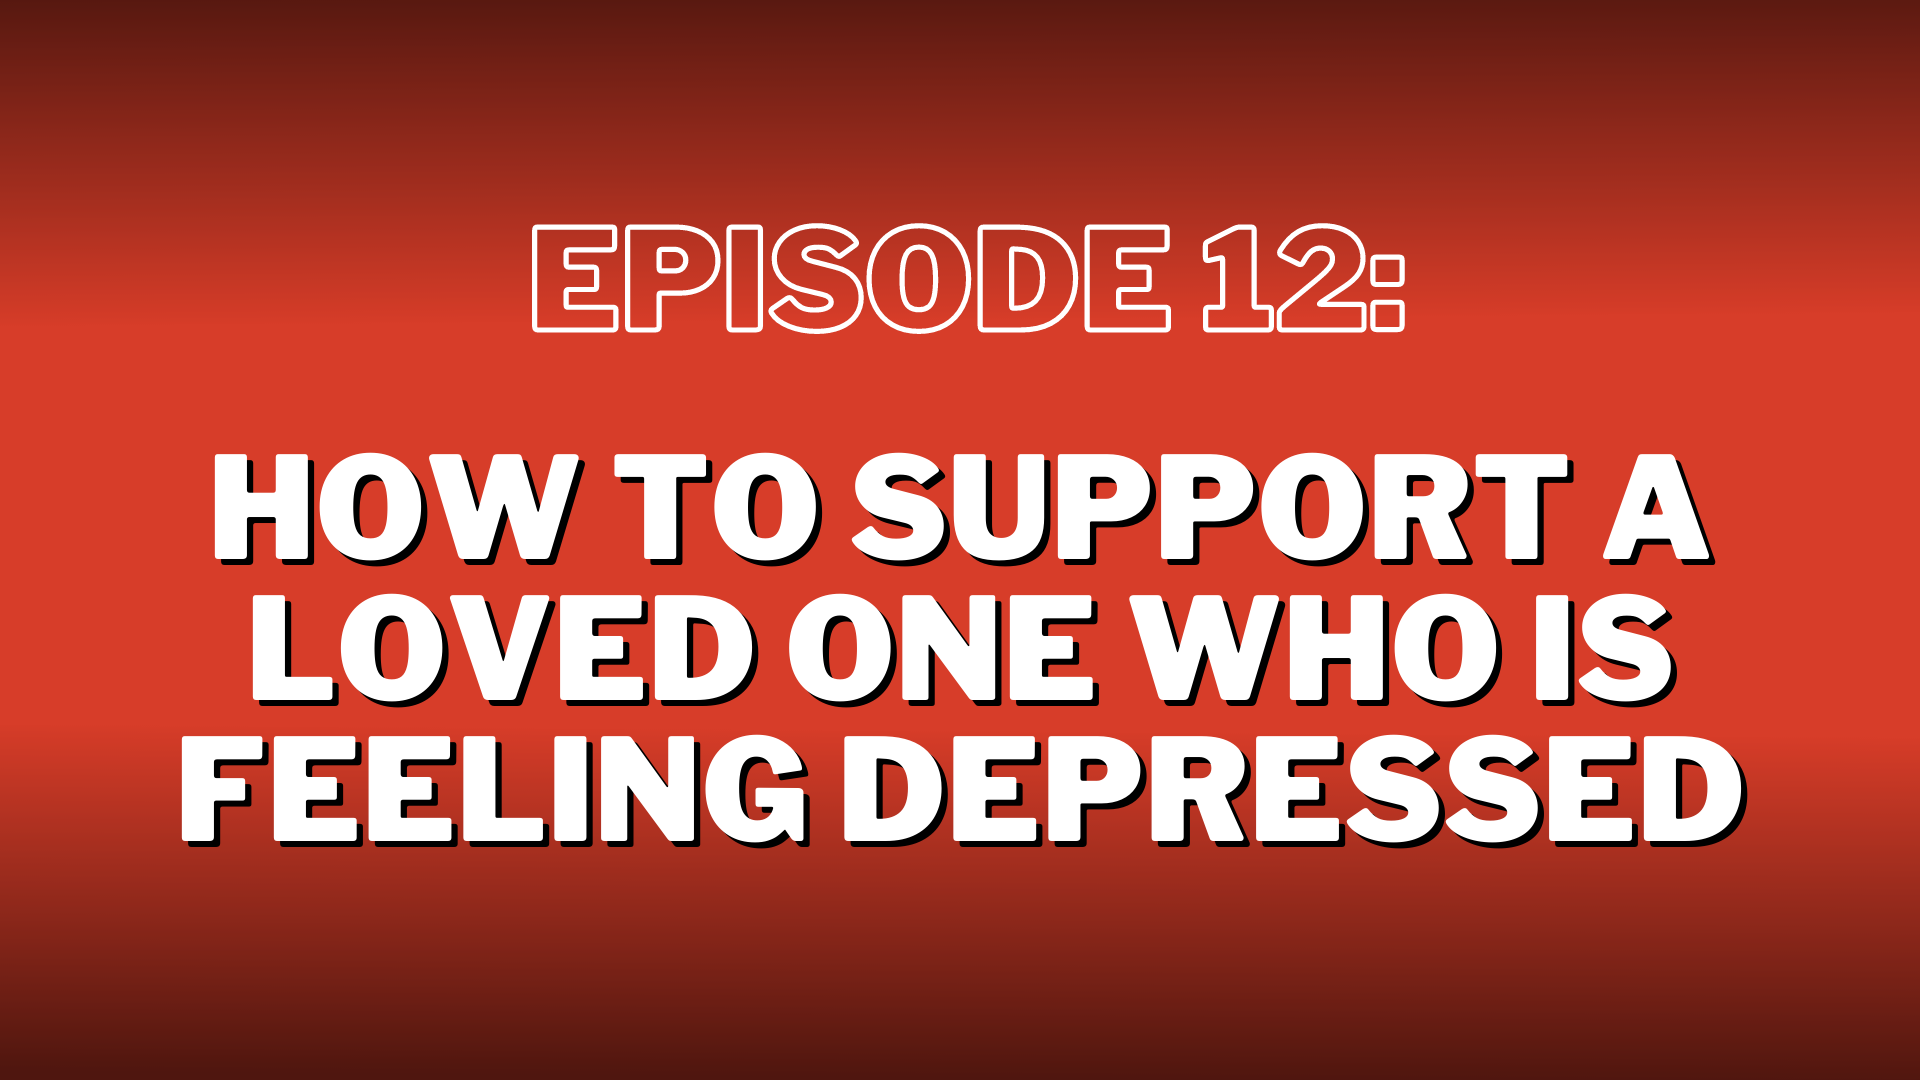 S3. Episode 12: How to Support a Loved One Who is Feeling Depressed – Show Notes